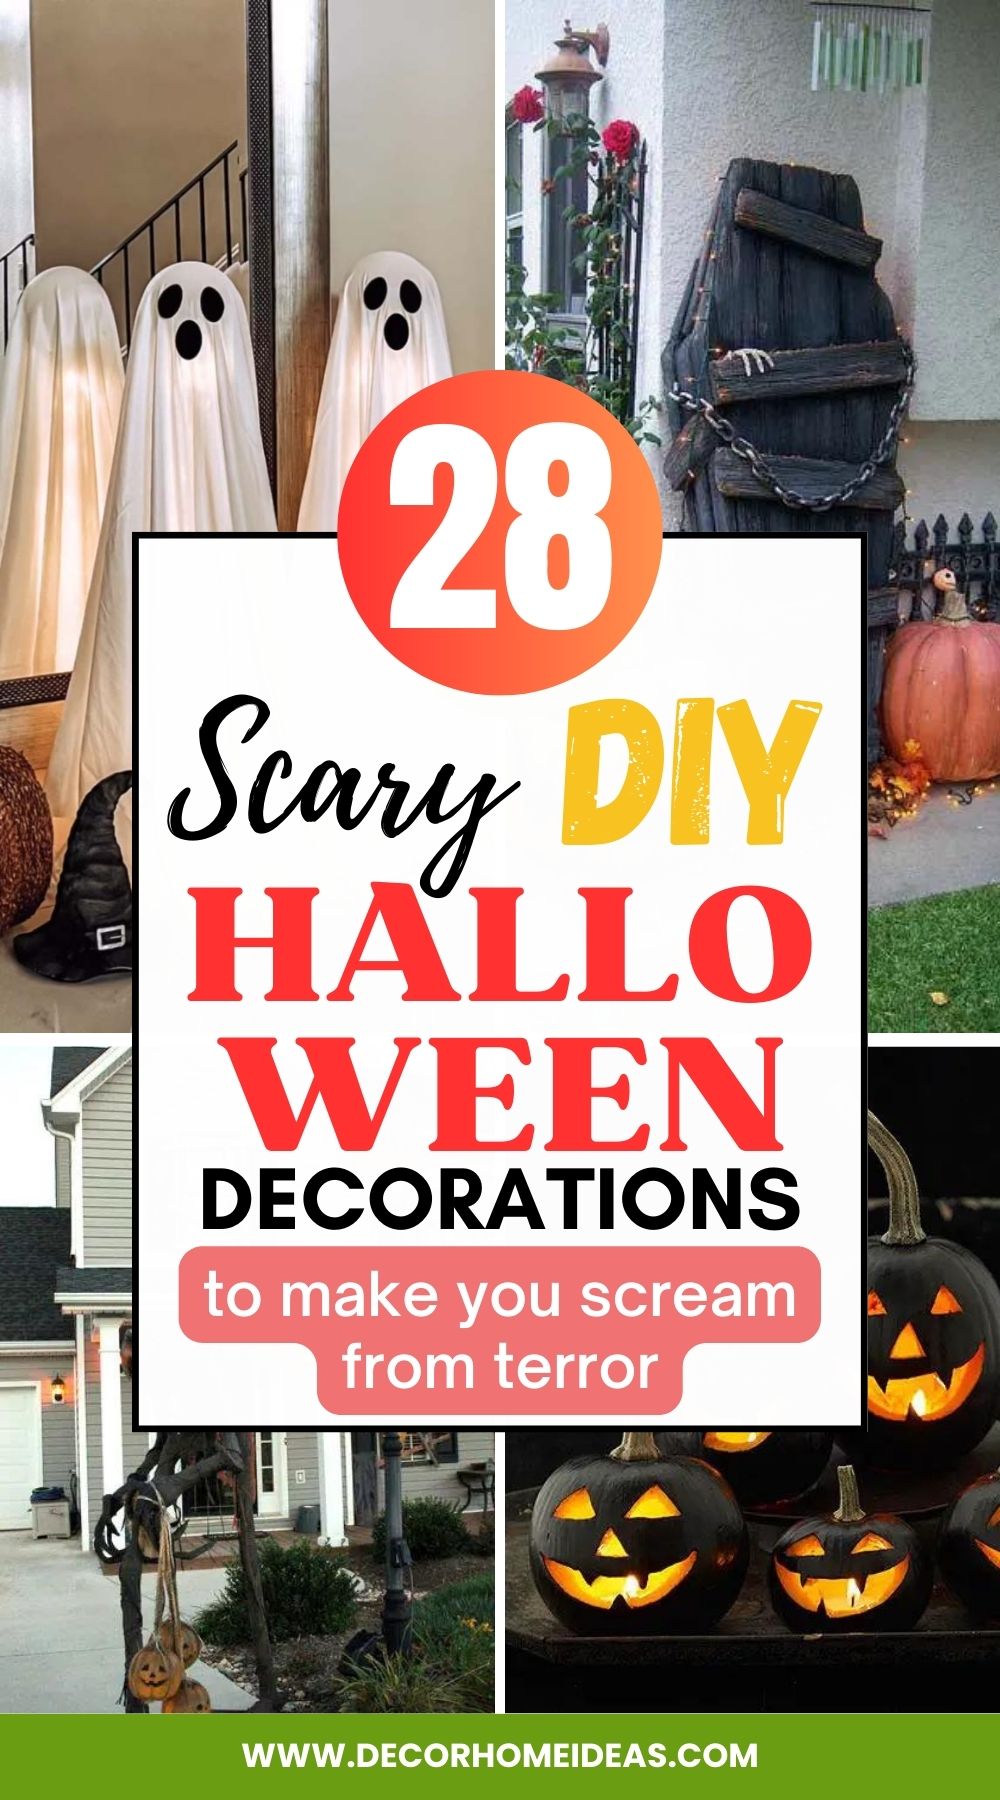 Prepare to be TERRIFIED! Explore these spine-chilling DIY Halloween decorations that will send shivers down your spine. From haunted ghosts to eerie pumpkins, get ready to create a haunted house like never before. Don't miss these 28 hair-raising ideas that will leave you screaming for more!